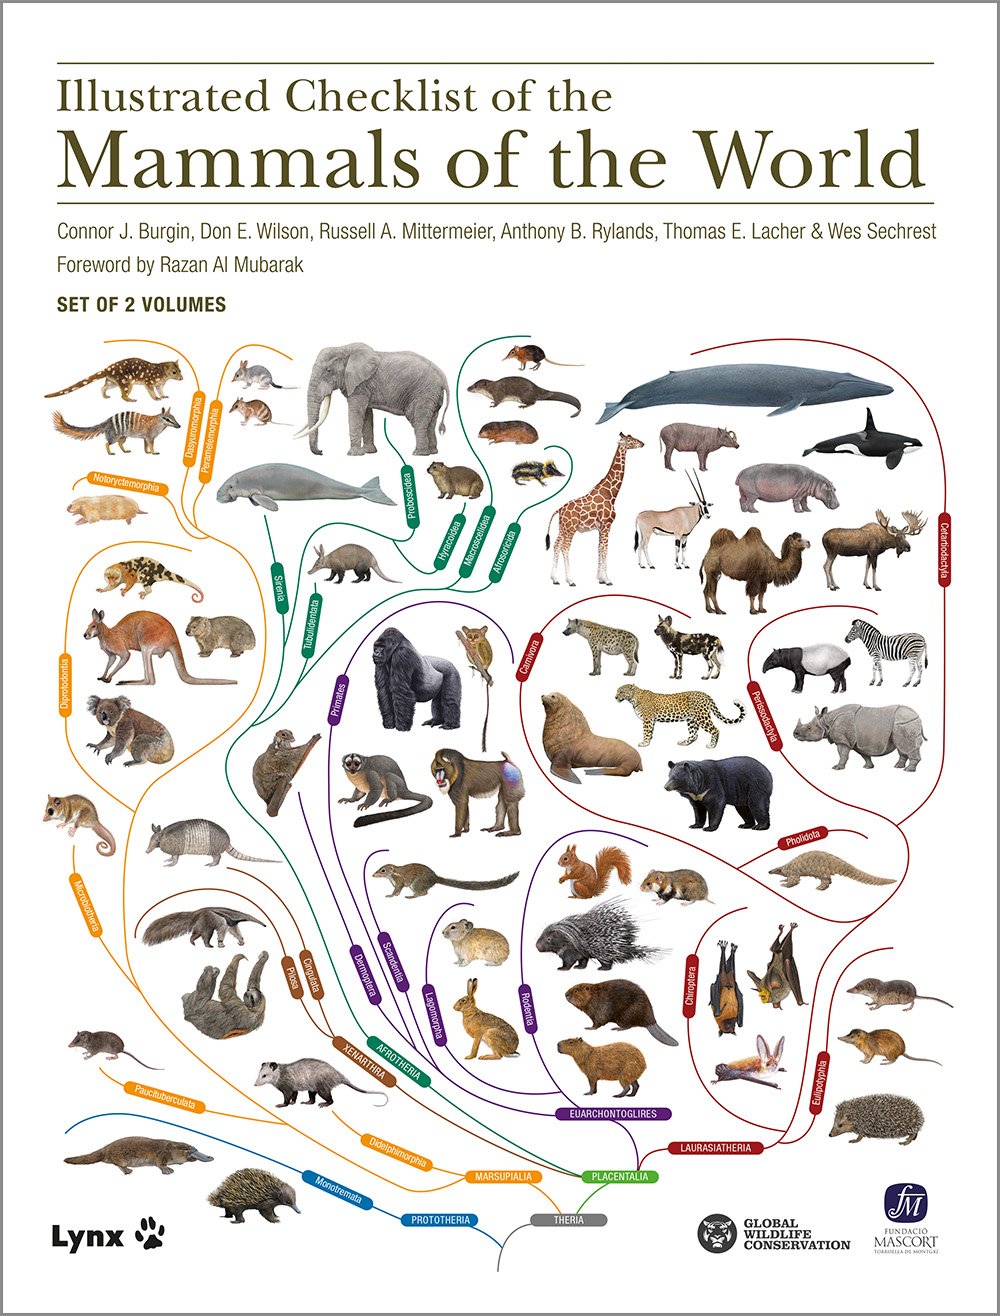 Illustrated Checklist of the Mammals of the World 2. kötet - Eulipootyphla to Carnivora (Rippl-Rónai Múzeum CC BY-NC-ND)